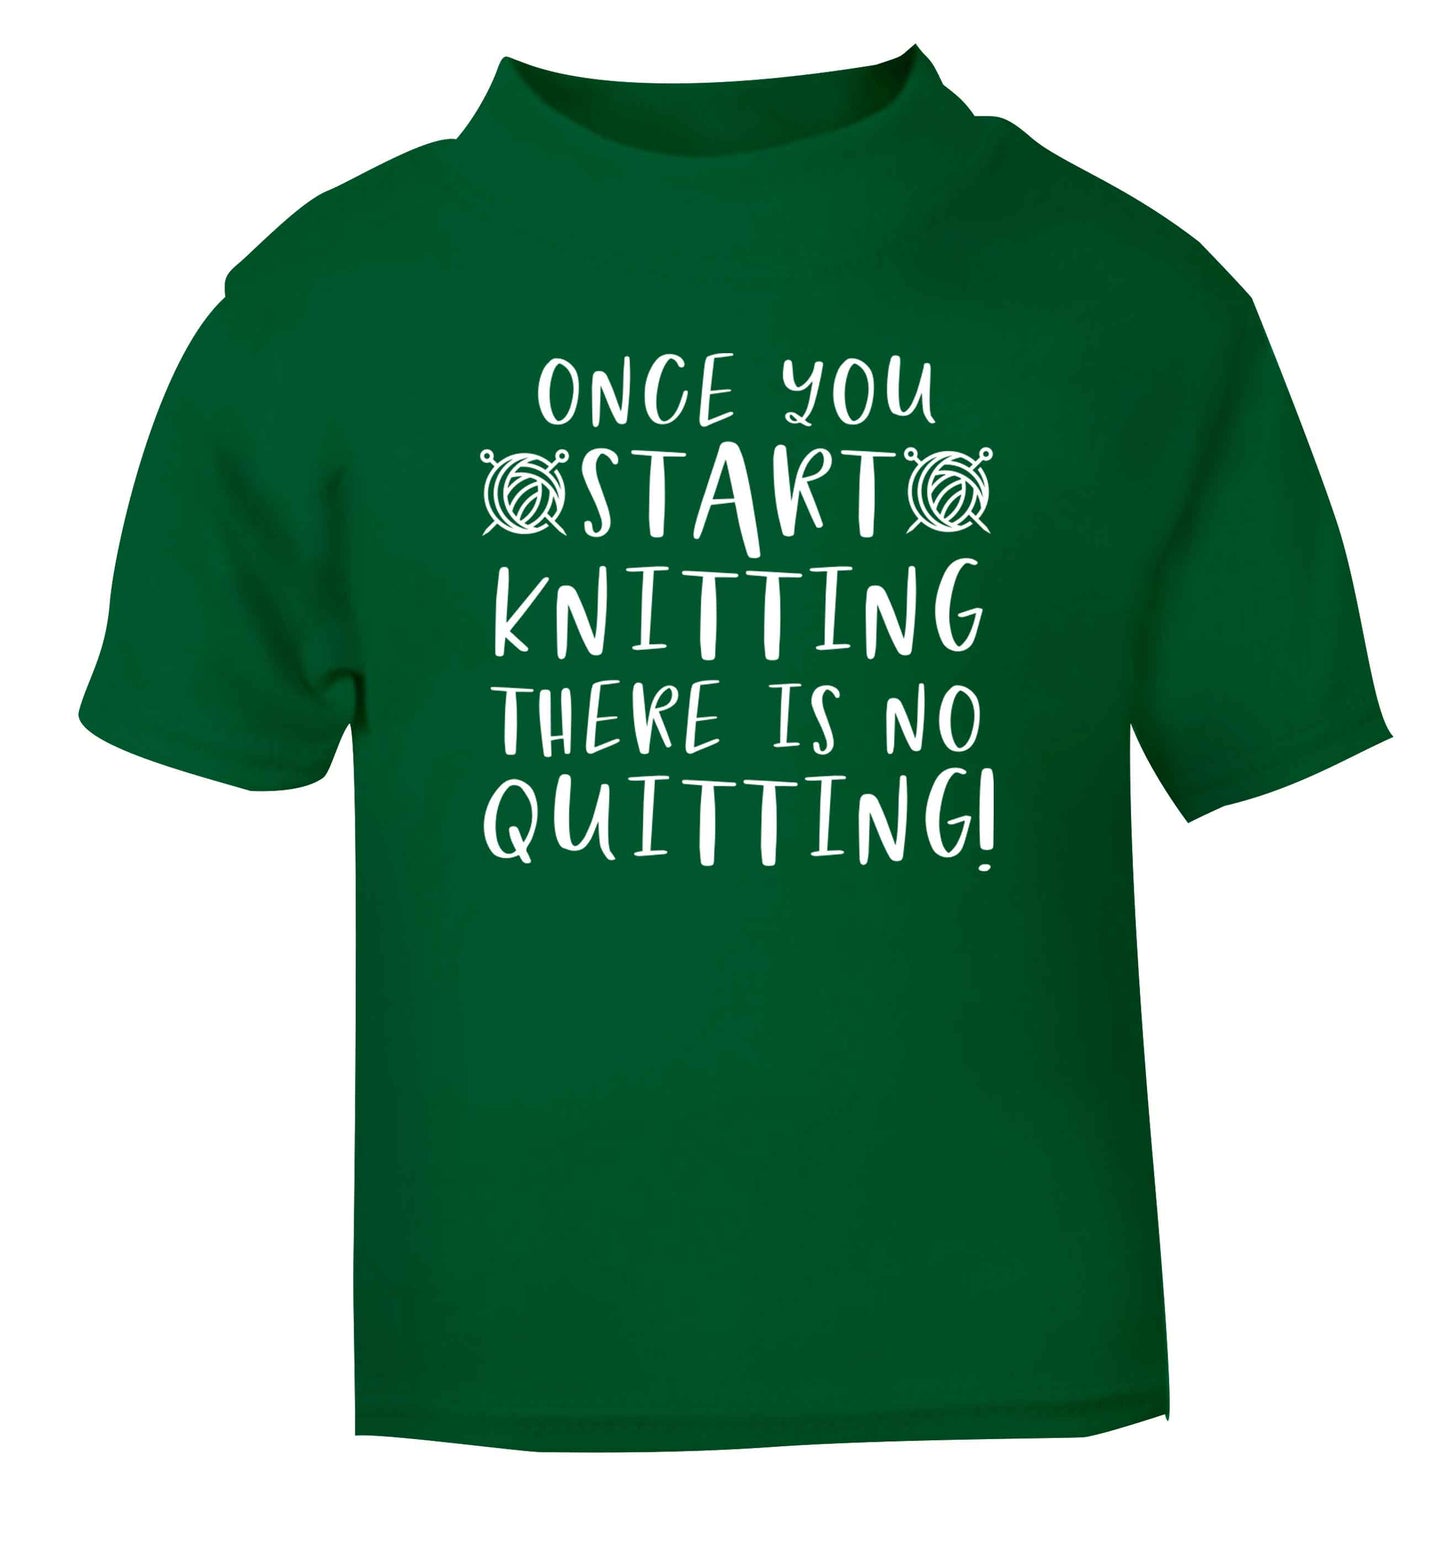 Once you start knitting there is no quitting! green Baby Toddler Tshirt 2 Years